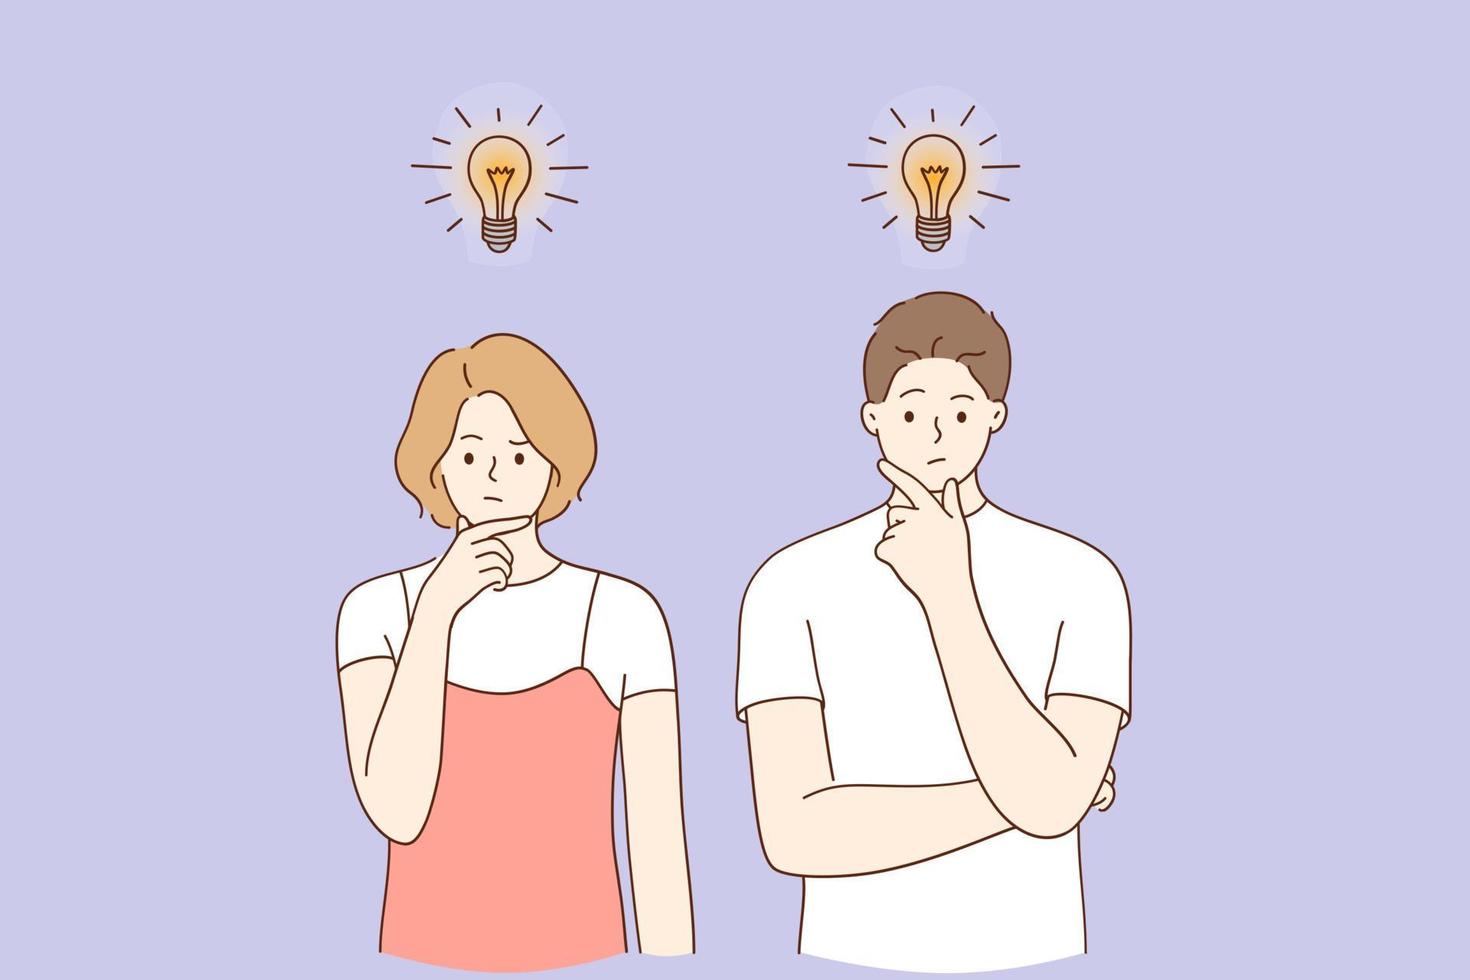 Innovation, new ideas, creativity concept. Creative man and woman standing thinking with light bulbs above meaning new opportunities, ideas, creative business projects and development illustration vector